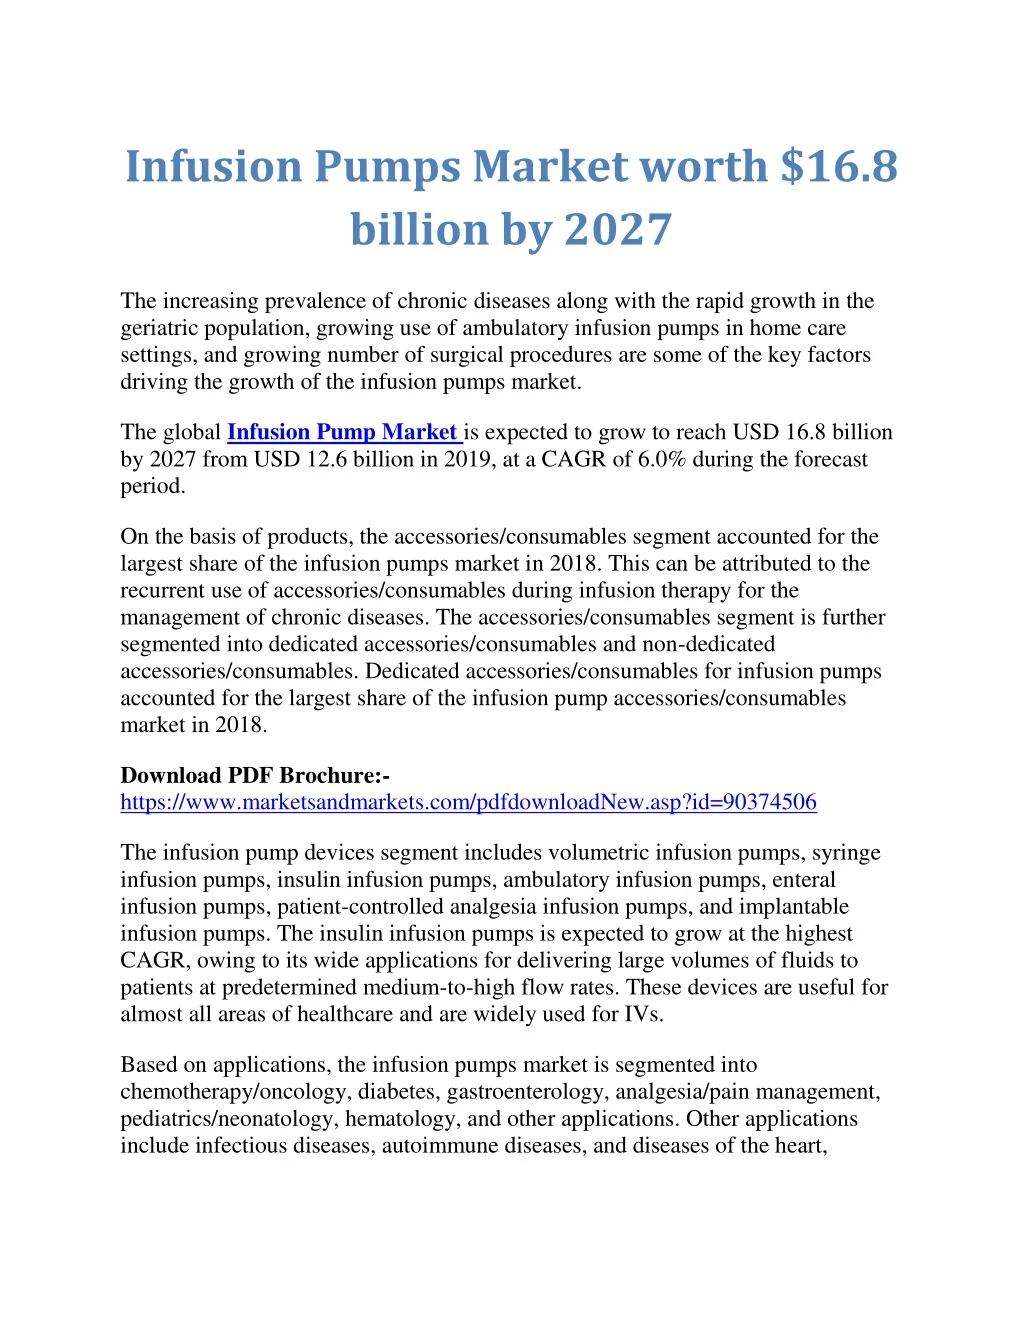 infusion pumps market worth 16 8 billion by 2027